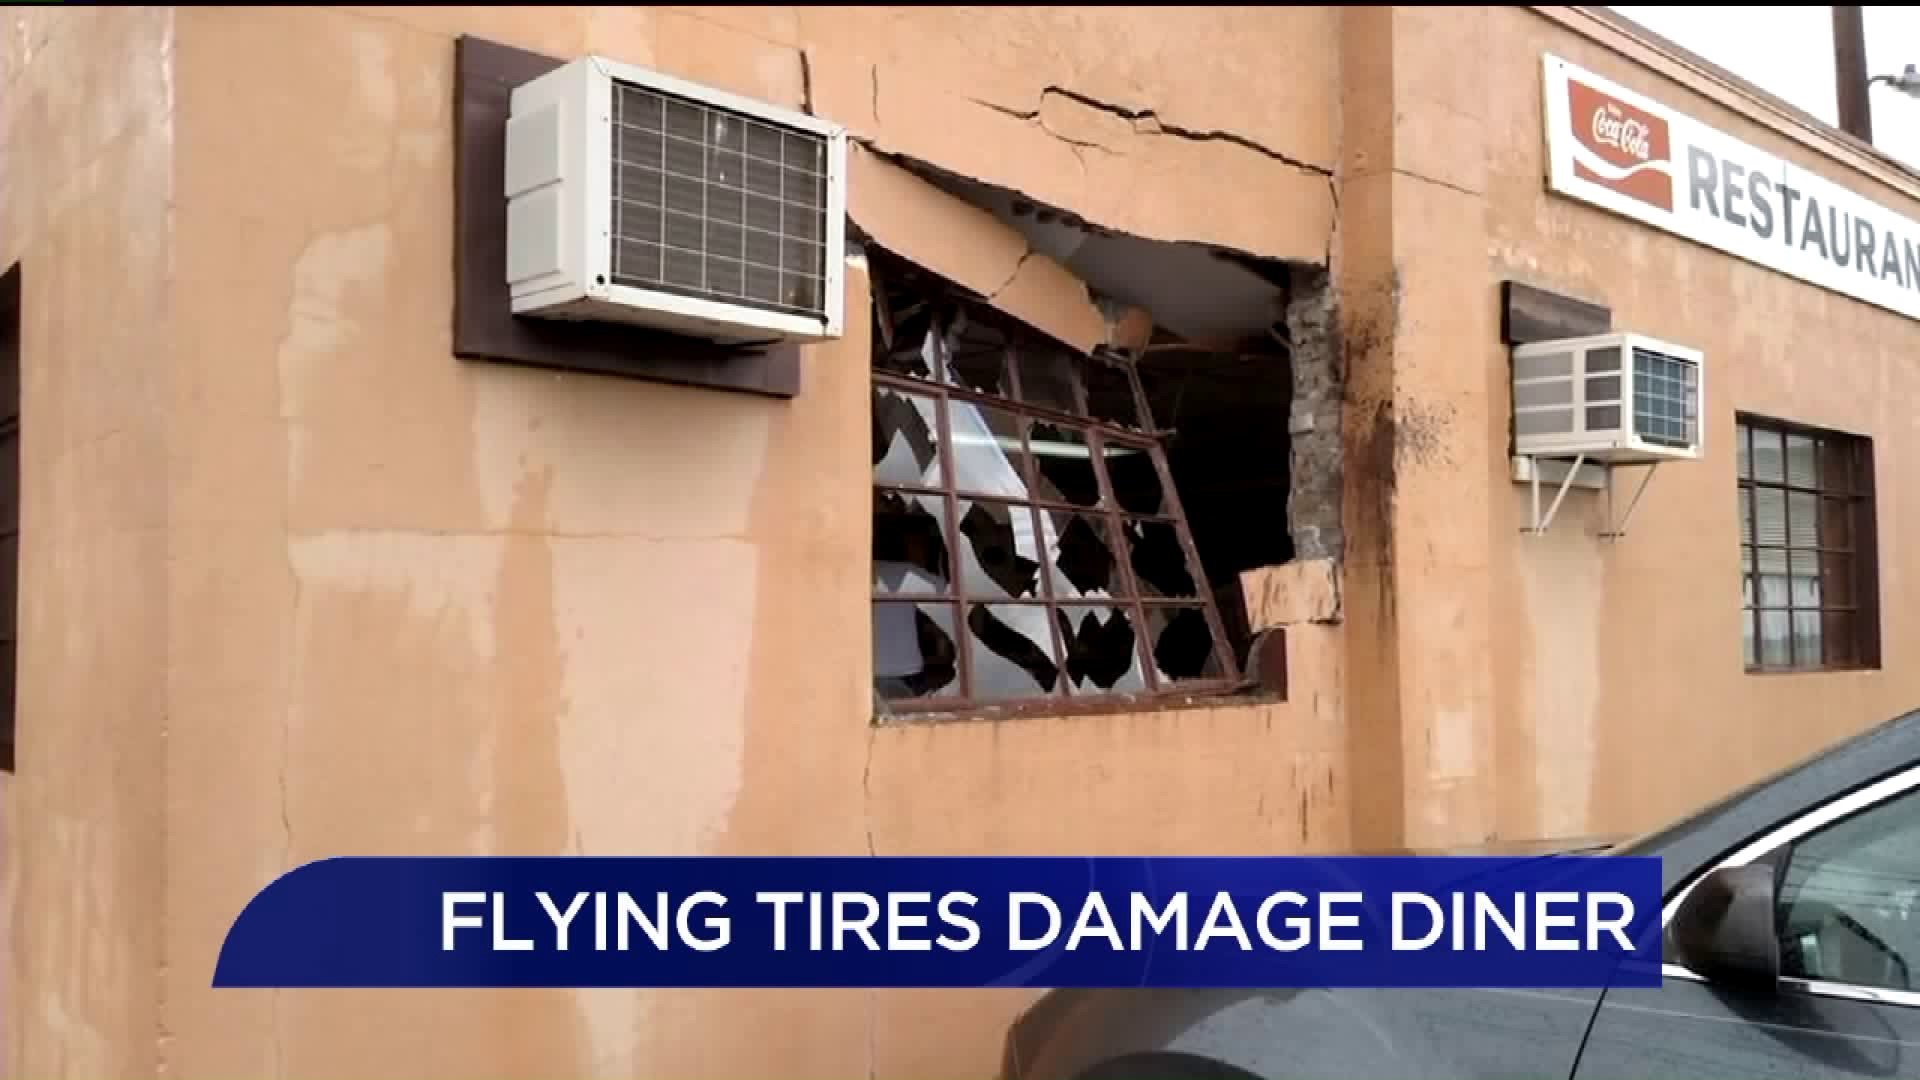 Flying Tires Damage Diner in Schuylkill County